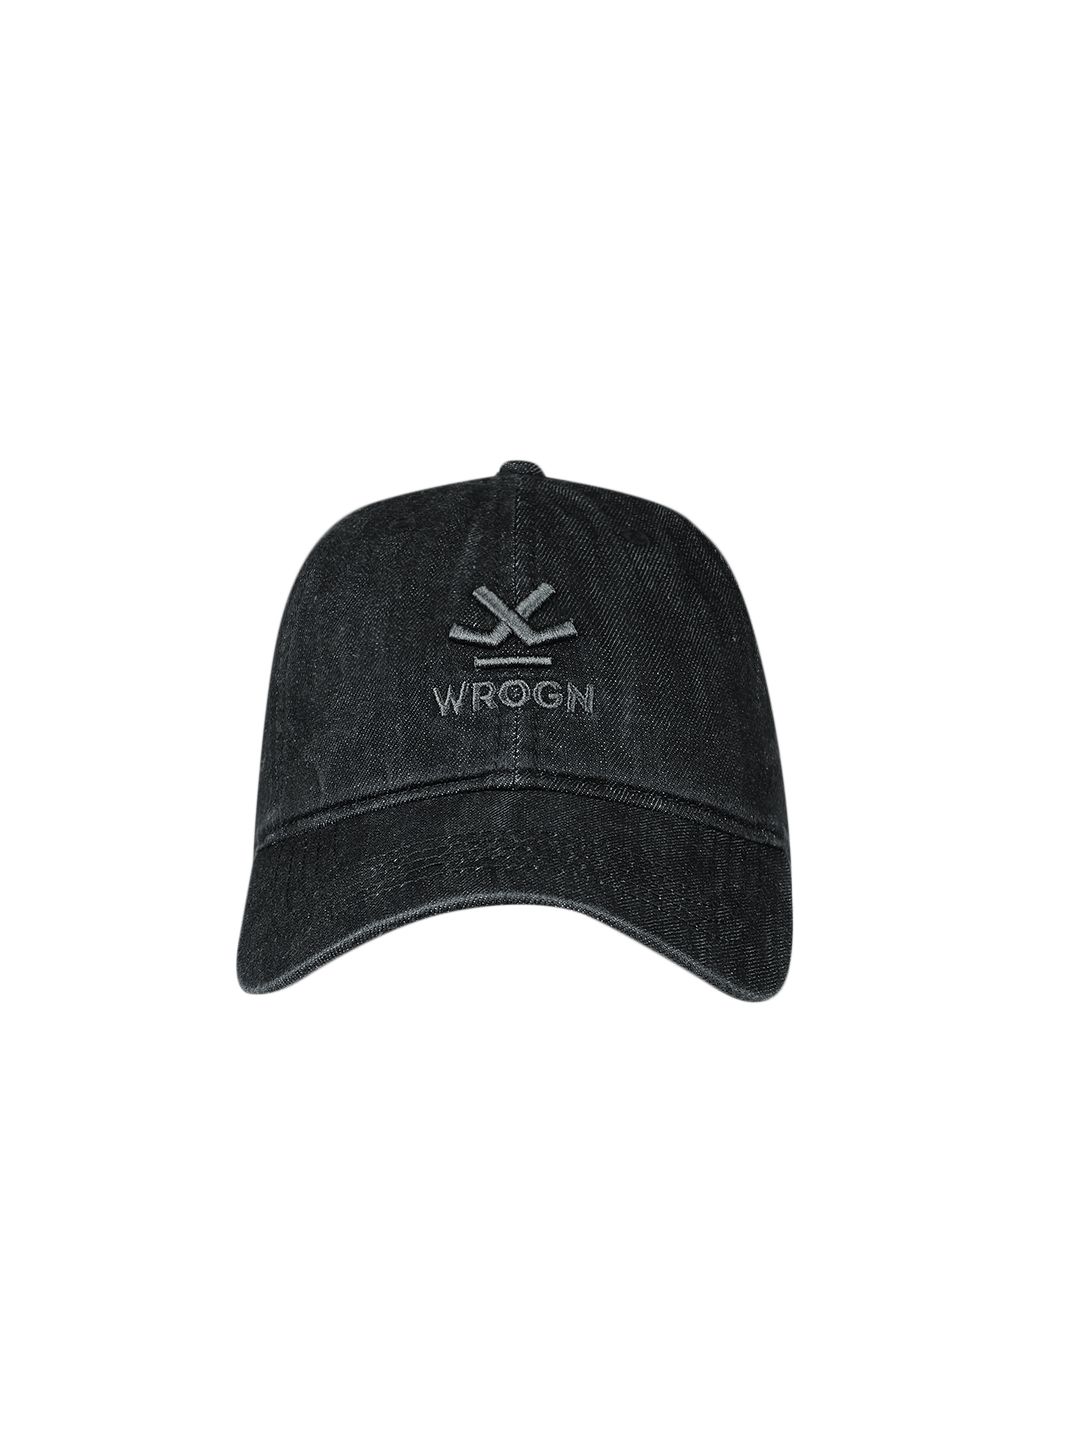 WROGN Unisex Black Embroidered Baseball Cap Price in India